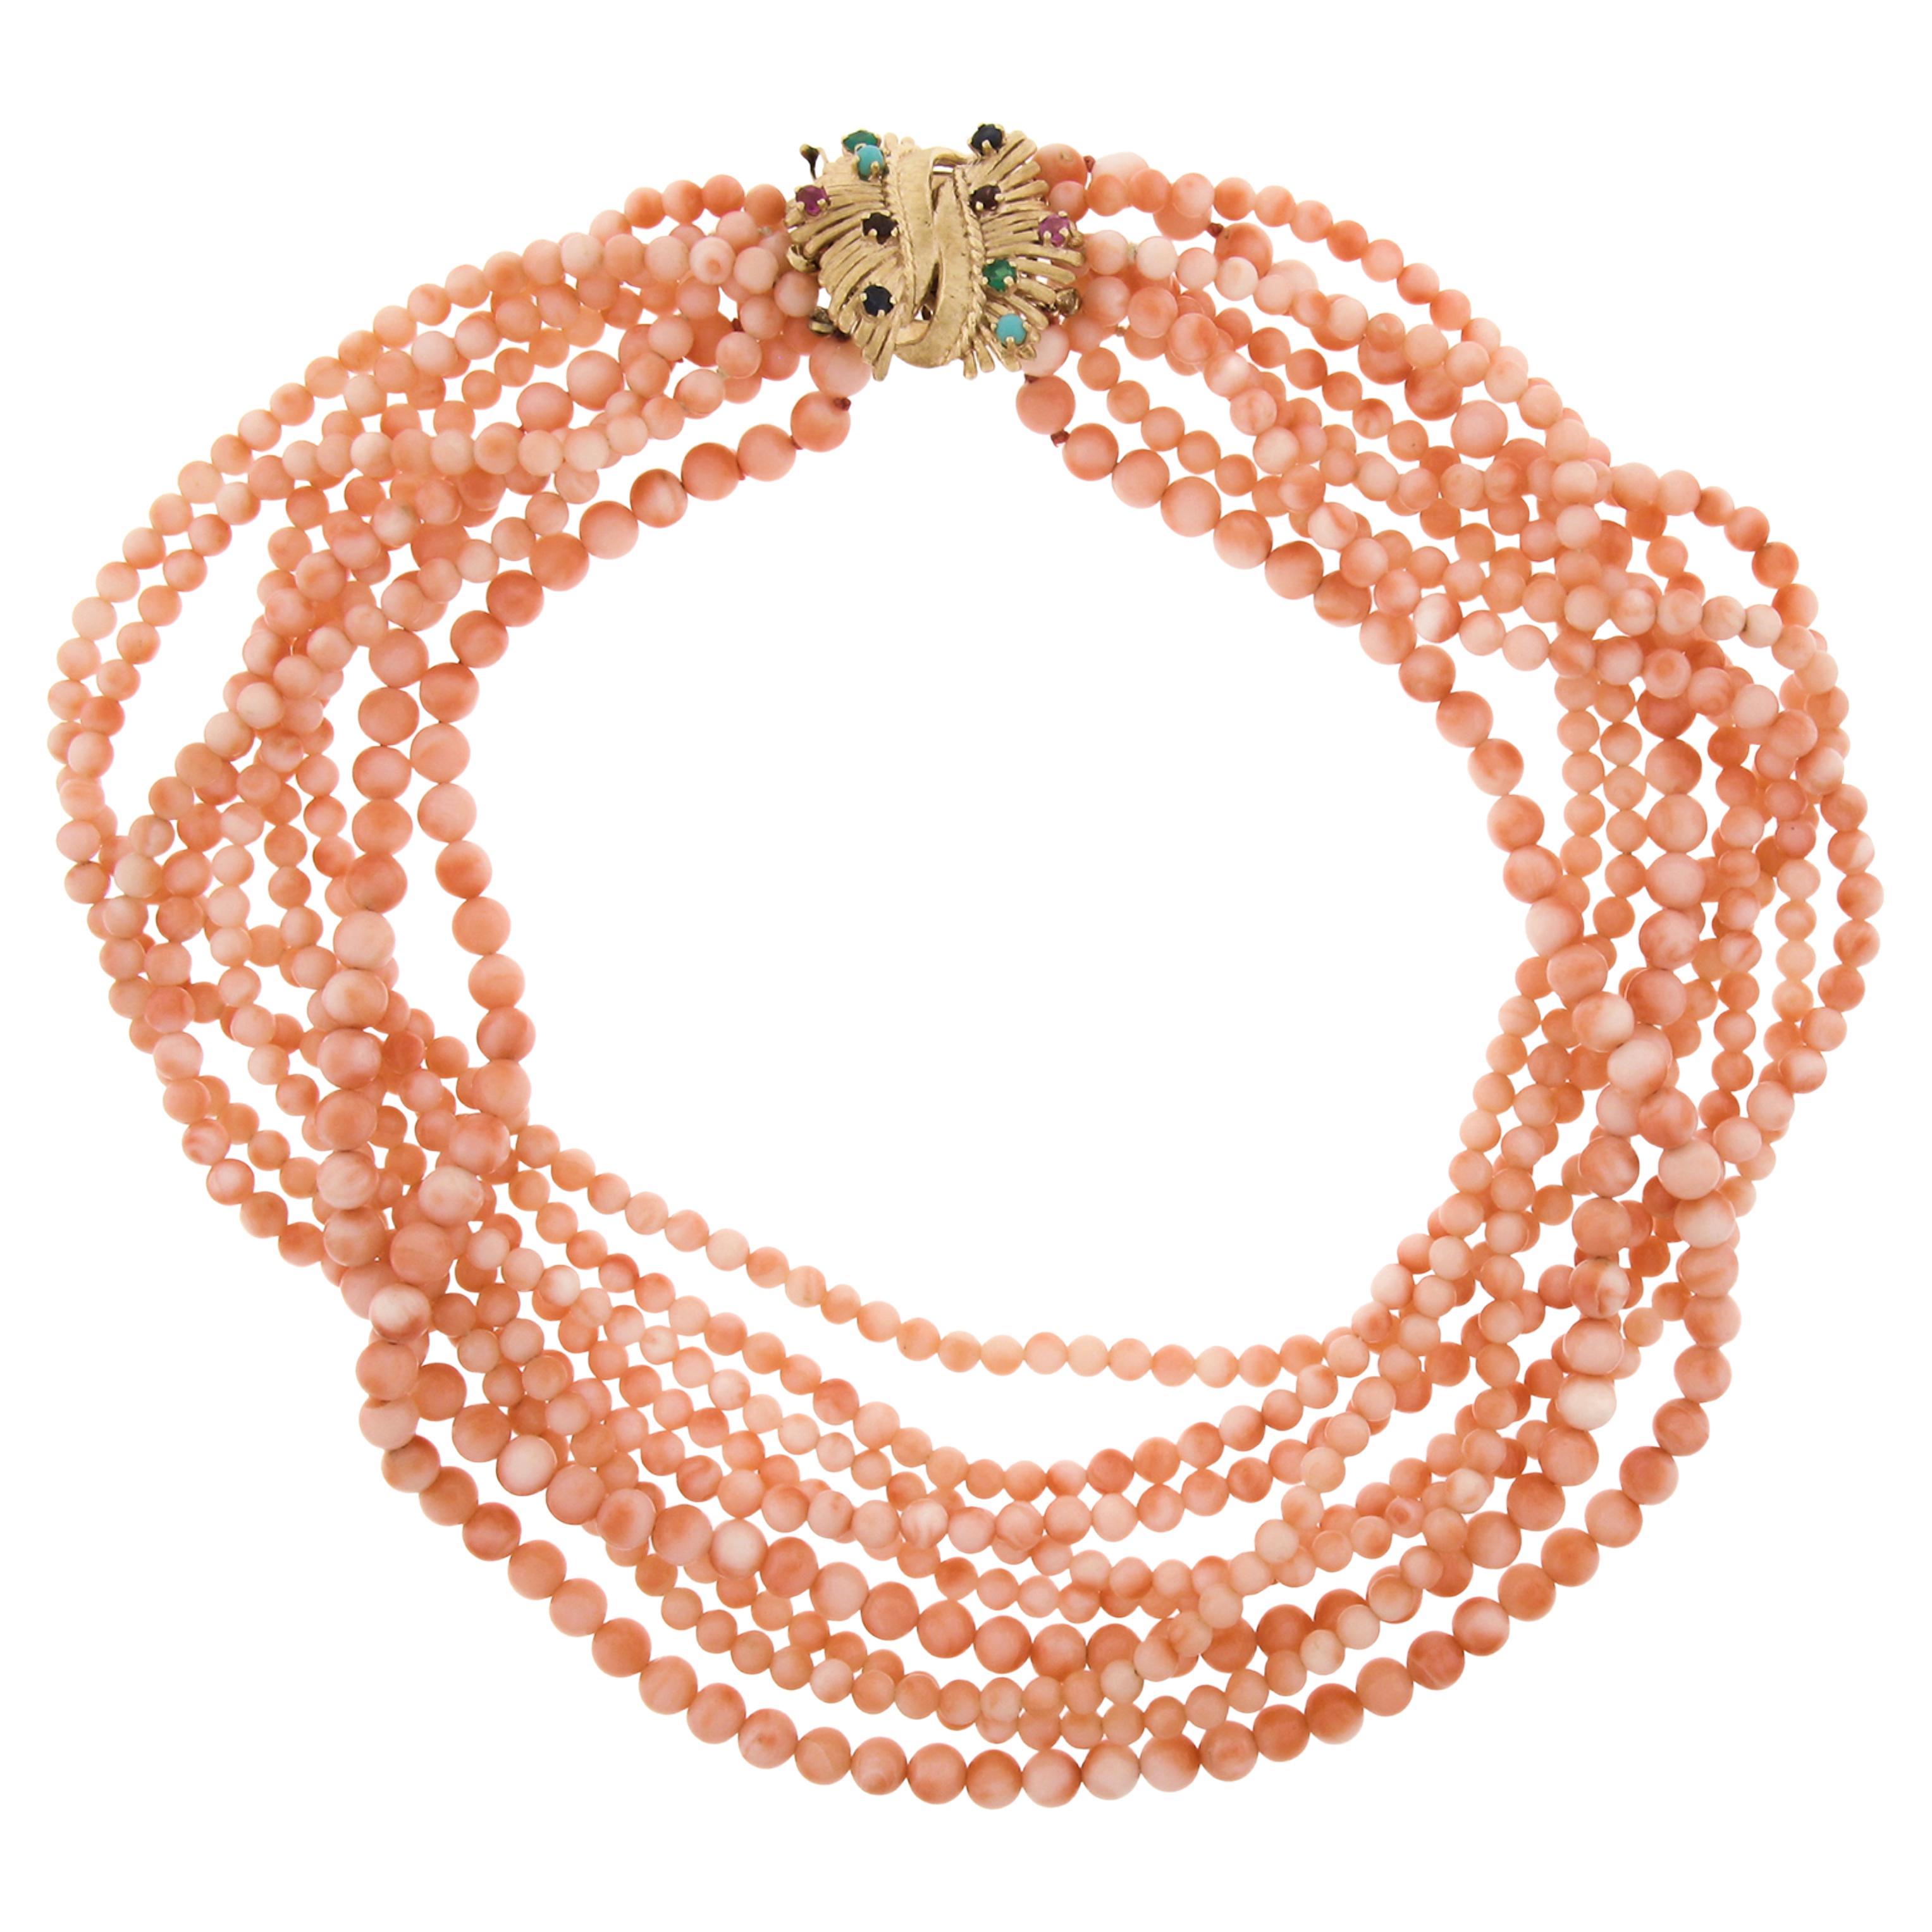 Vintage 17" Multi Strand Coral Bead Necklace w/ 14k Gold Colored Stone Clasp For Sale